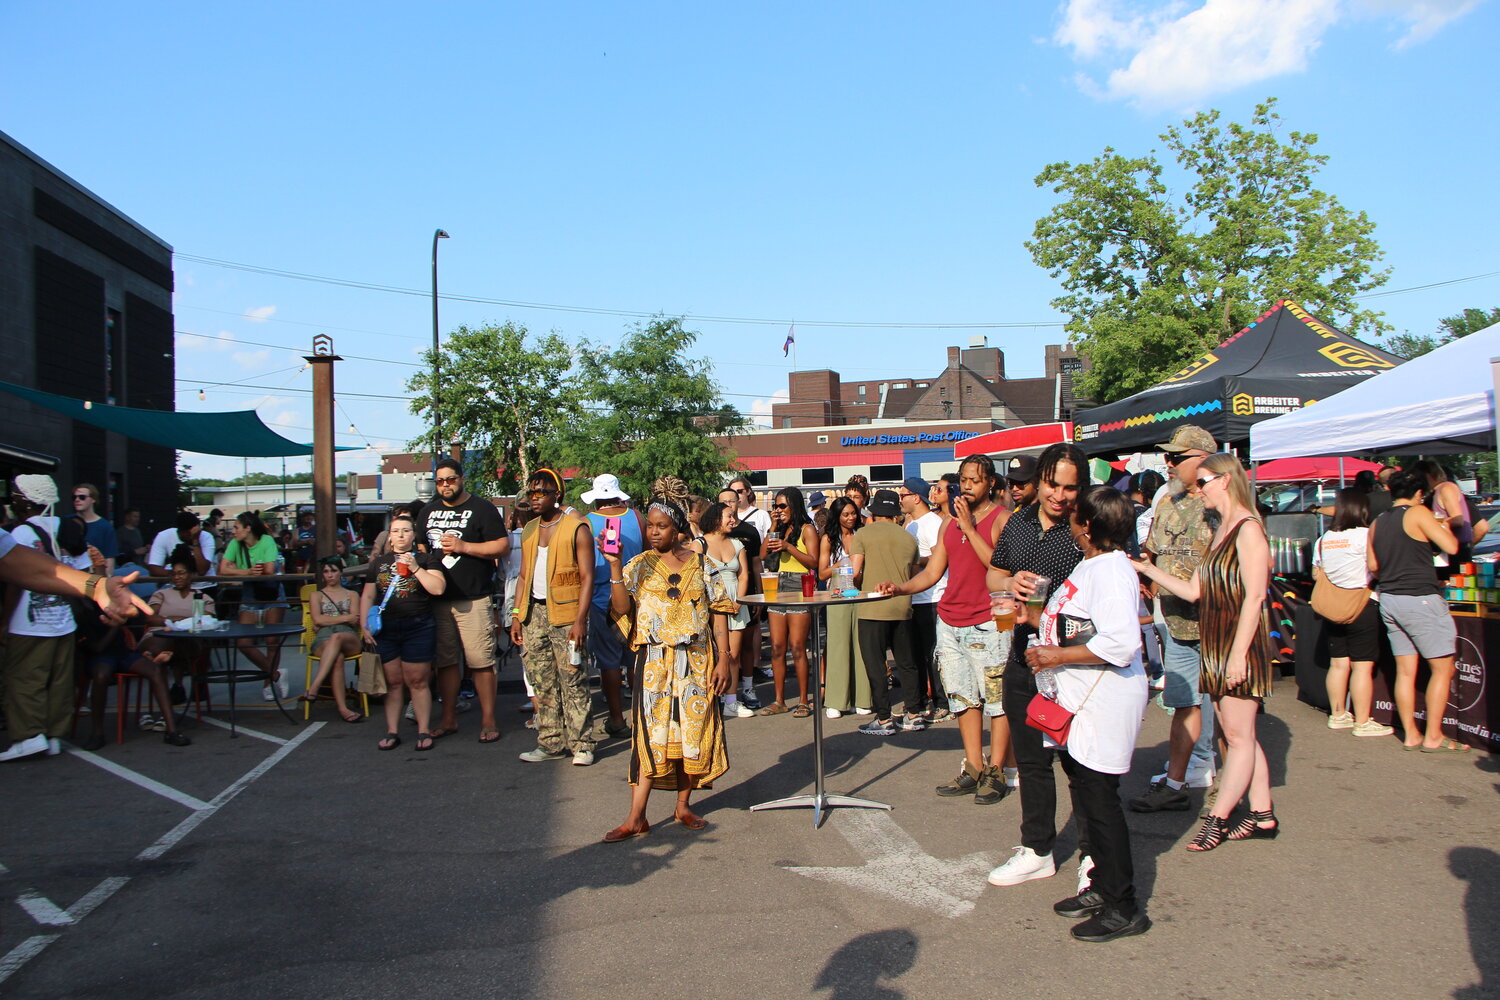 A crowd gathers around artists performing at the KRSM 98.9 booth at Soul of the Southside festival on Monday, June 19.